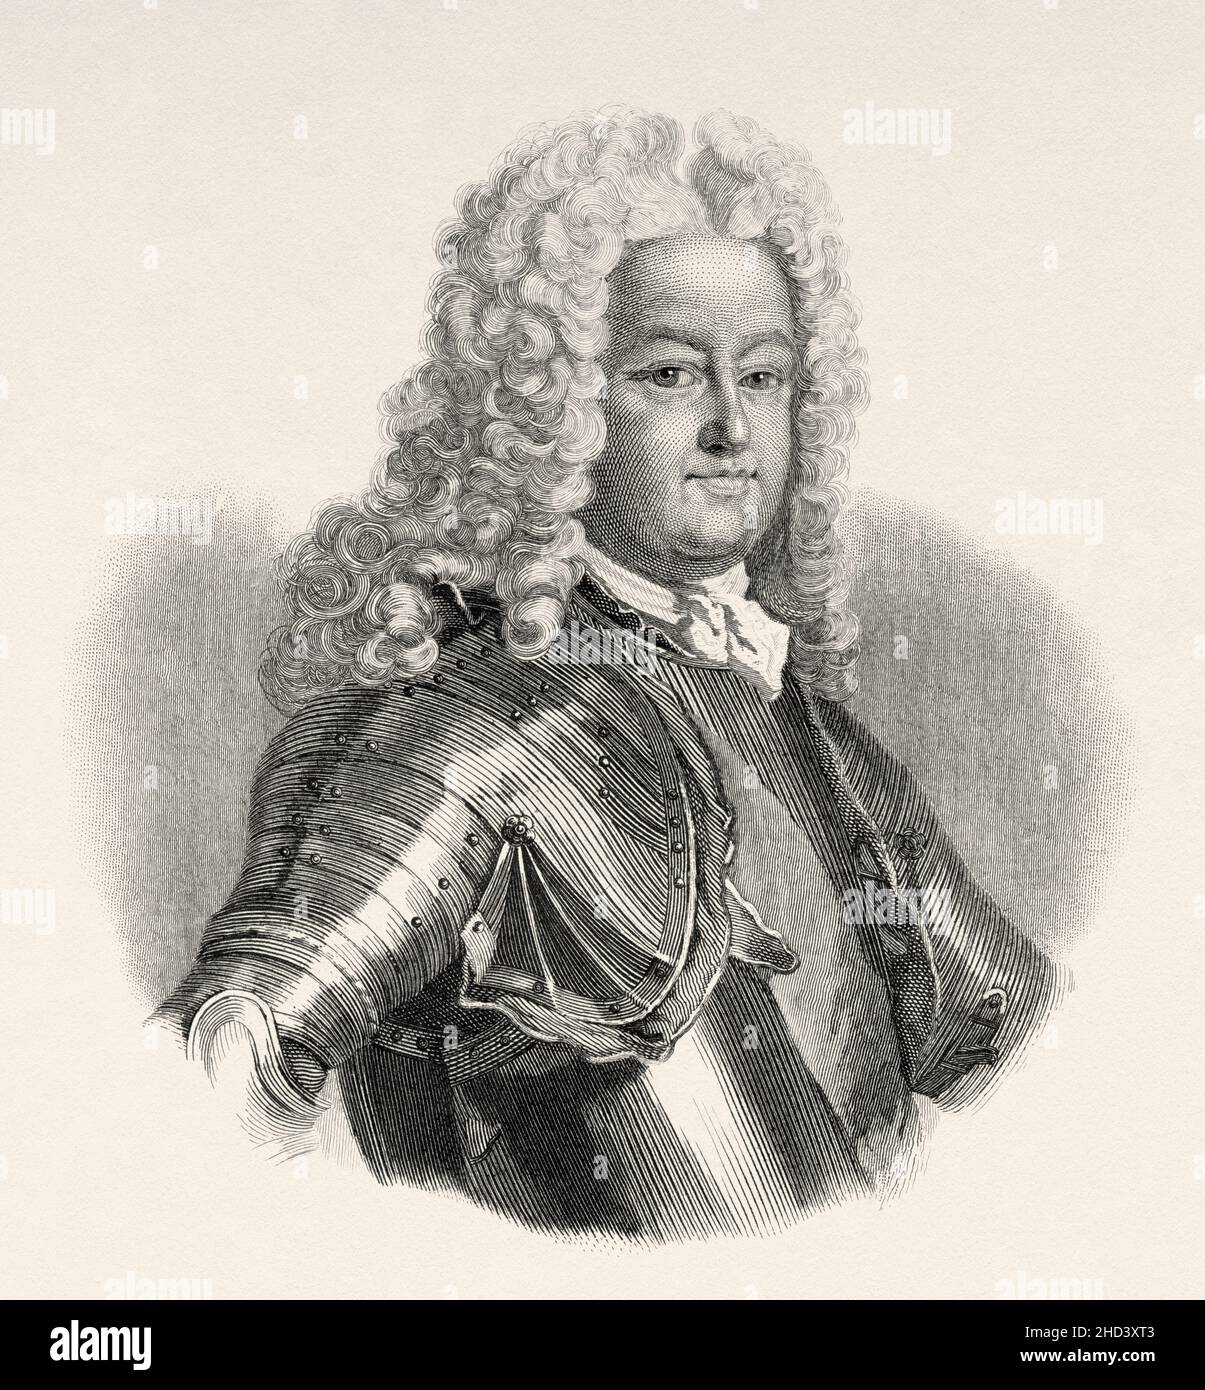 Stanisław I Leszczyński (1677-1766) Stanislaus I King of Poland, Grand Duke of Lithuania, Duke of Lorraine and a count of the Holy Roman Empire. Europe. Old 19th century engraved illustration from Portraits et histoire des hommes utile by Societe Montyon et Franklin 1837 Stock Photo